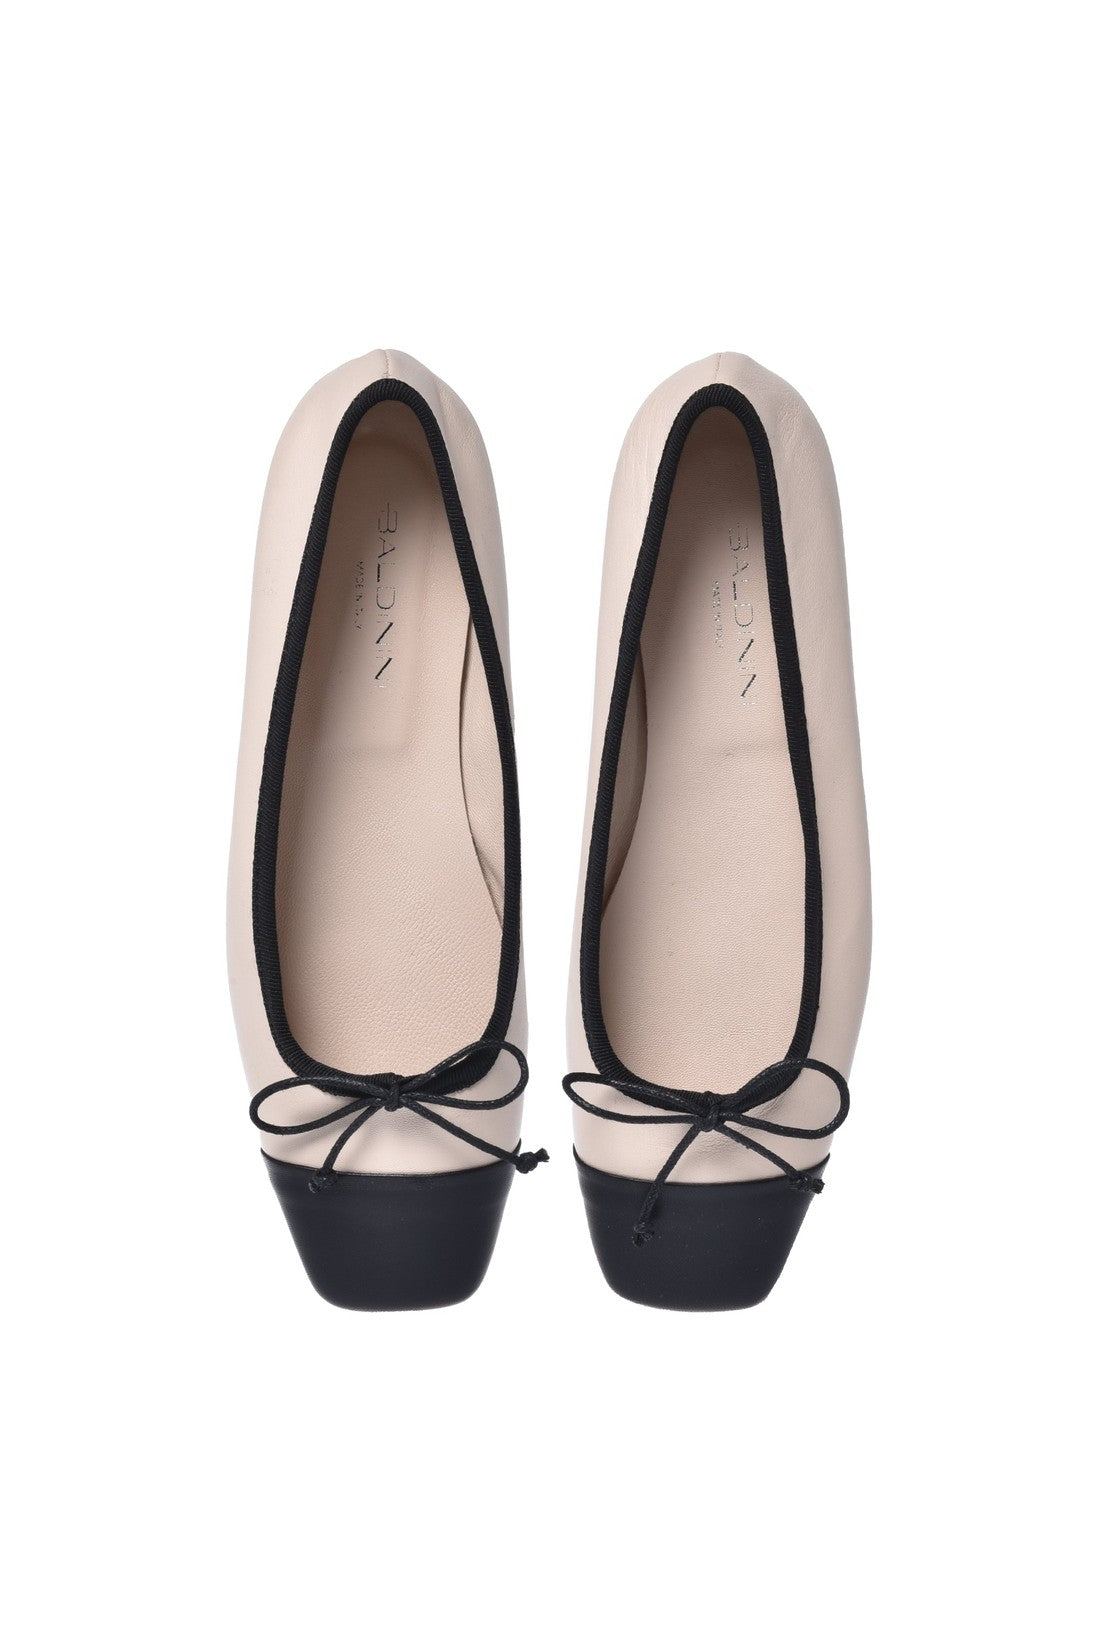 Ballerina pump in black and beige nappa leather